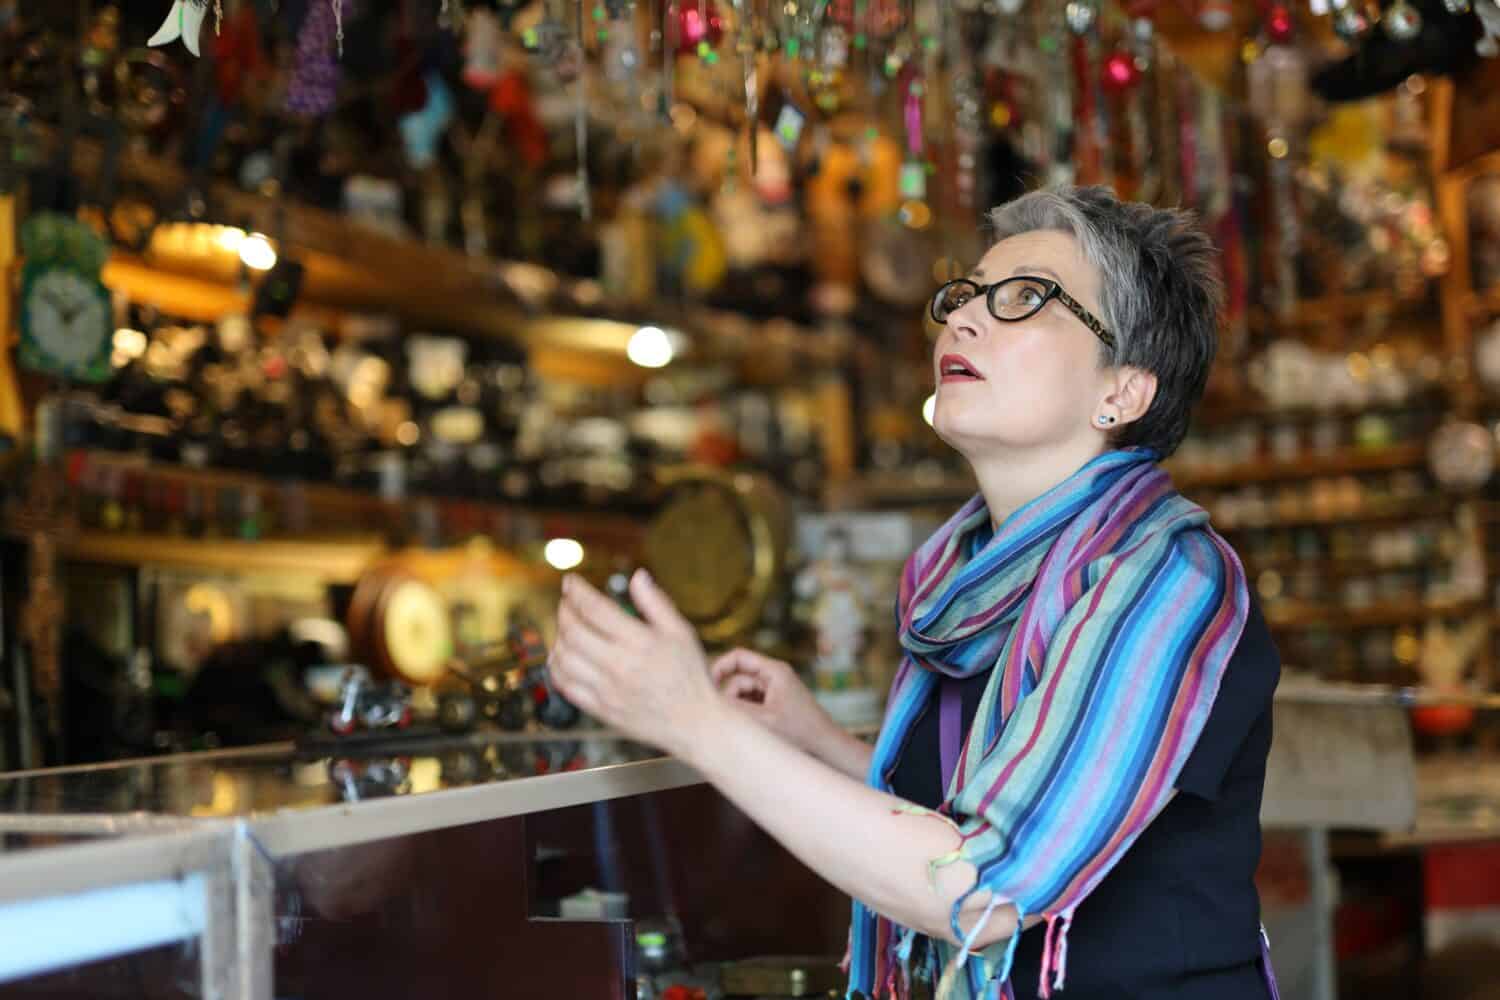 A cheerful mature woman browses for antique items at a flea market store. She is wearing a colorful scarf and looking at the display case with various jewelry.